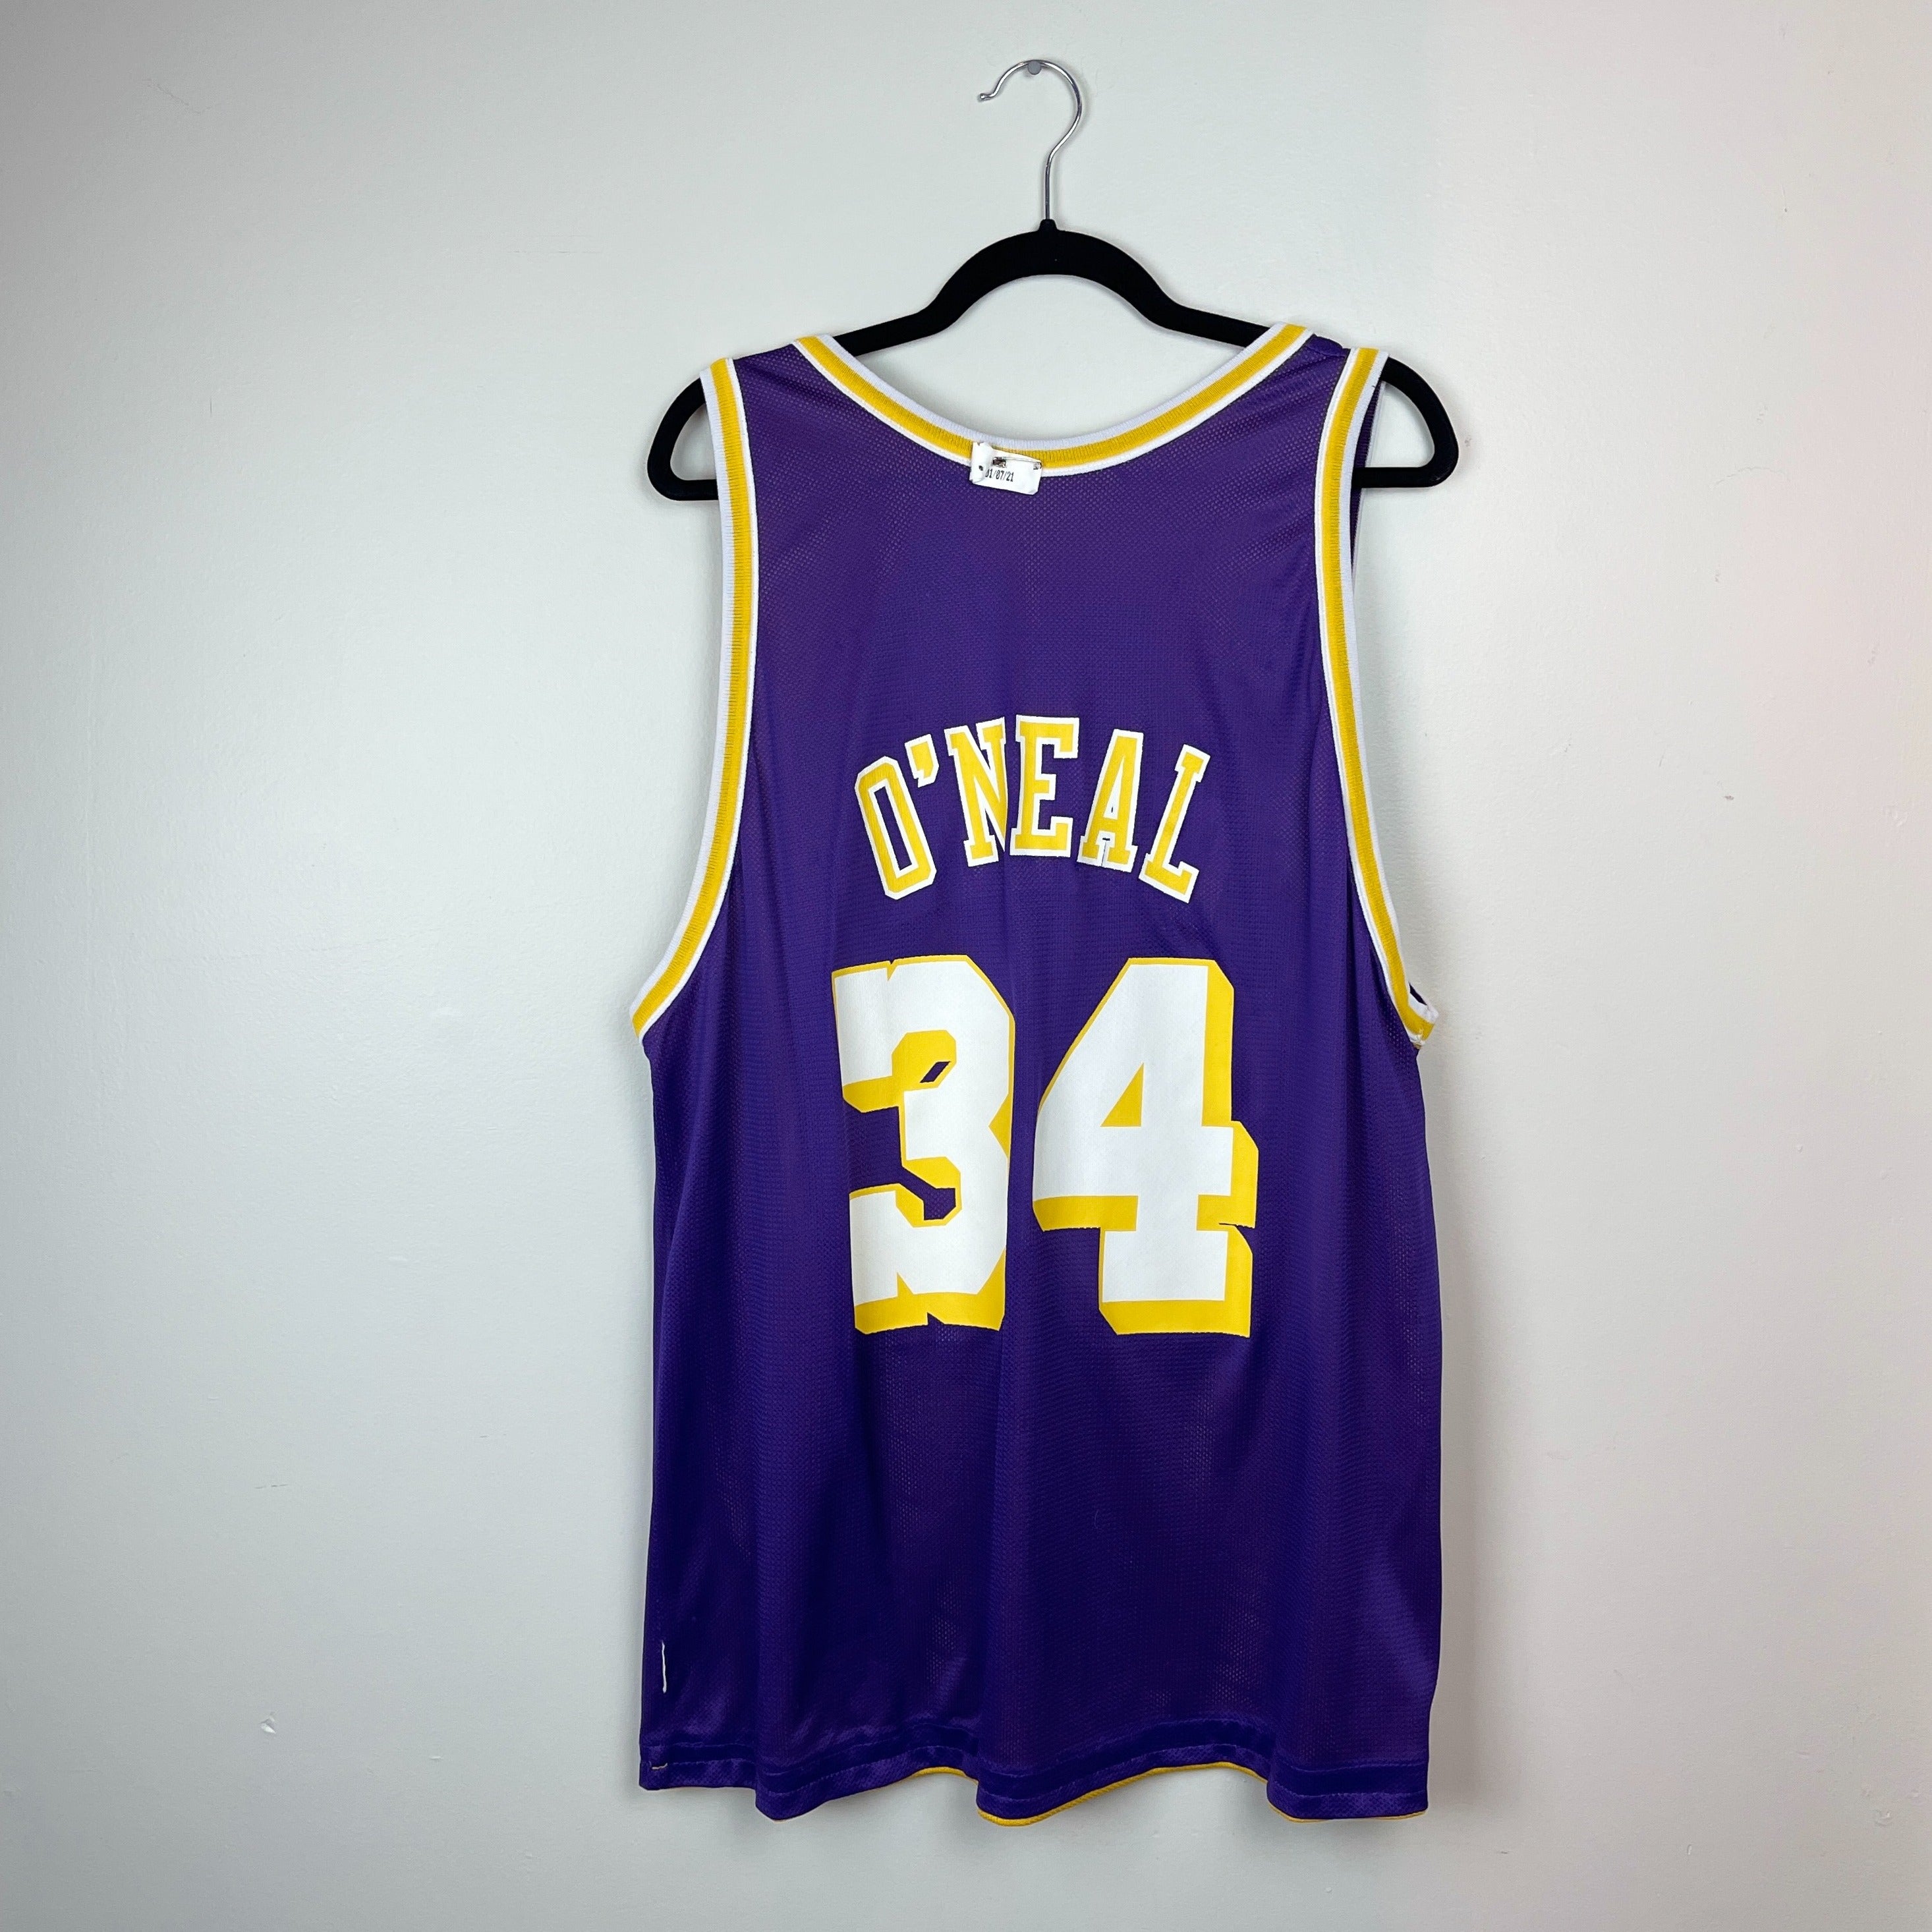 CHAMPION x LOS ANGELES LAKERS "SHAQUILLE O'NEAL" #34 REVERSIBLE JERSEY